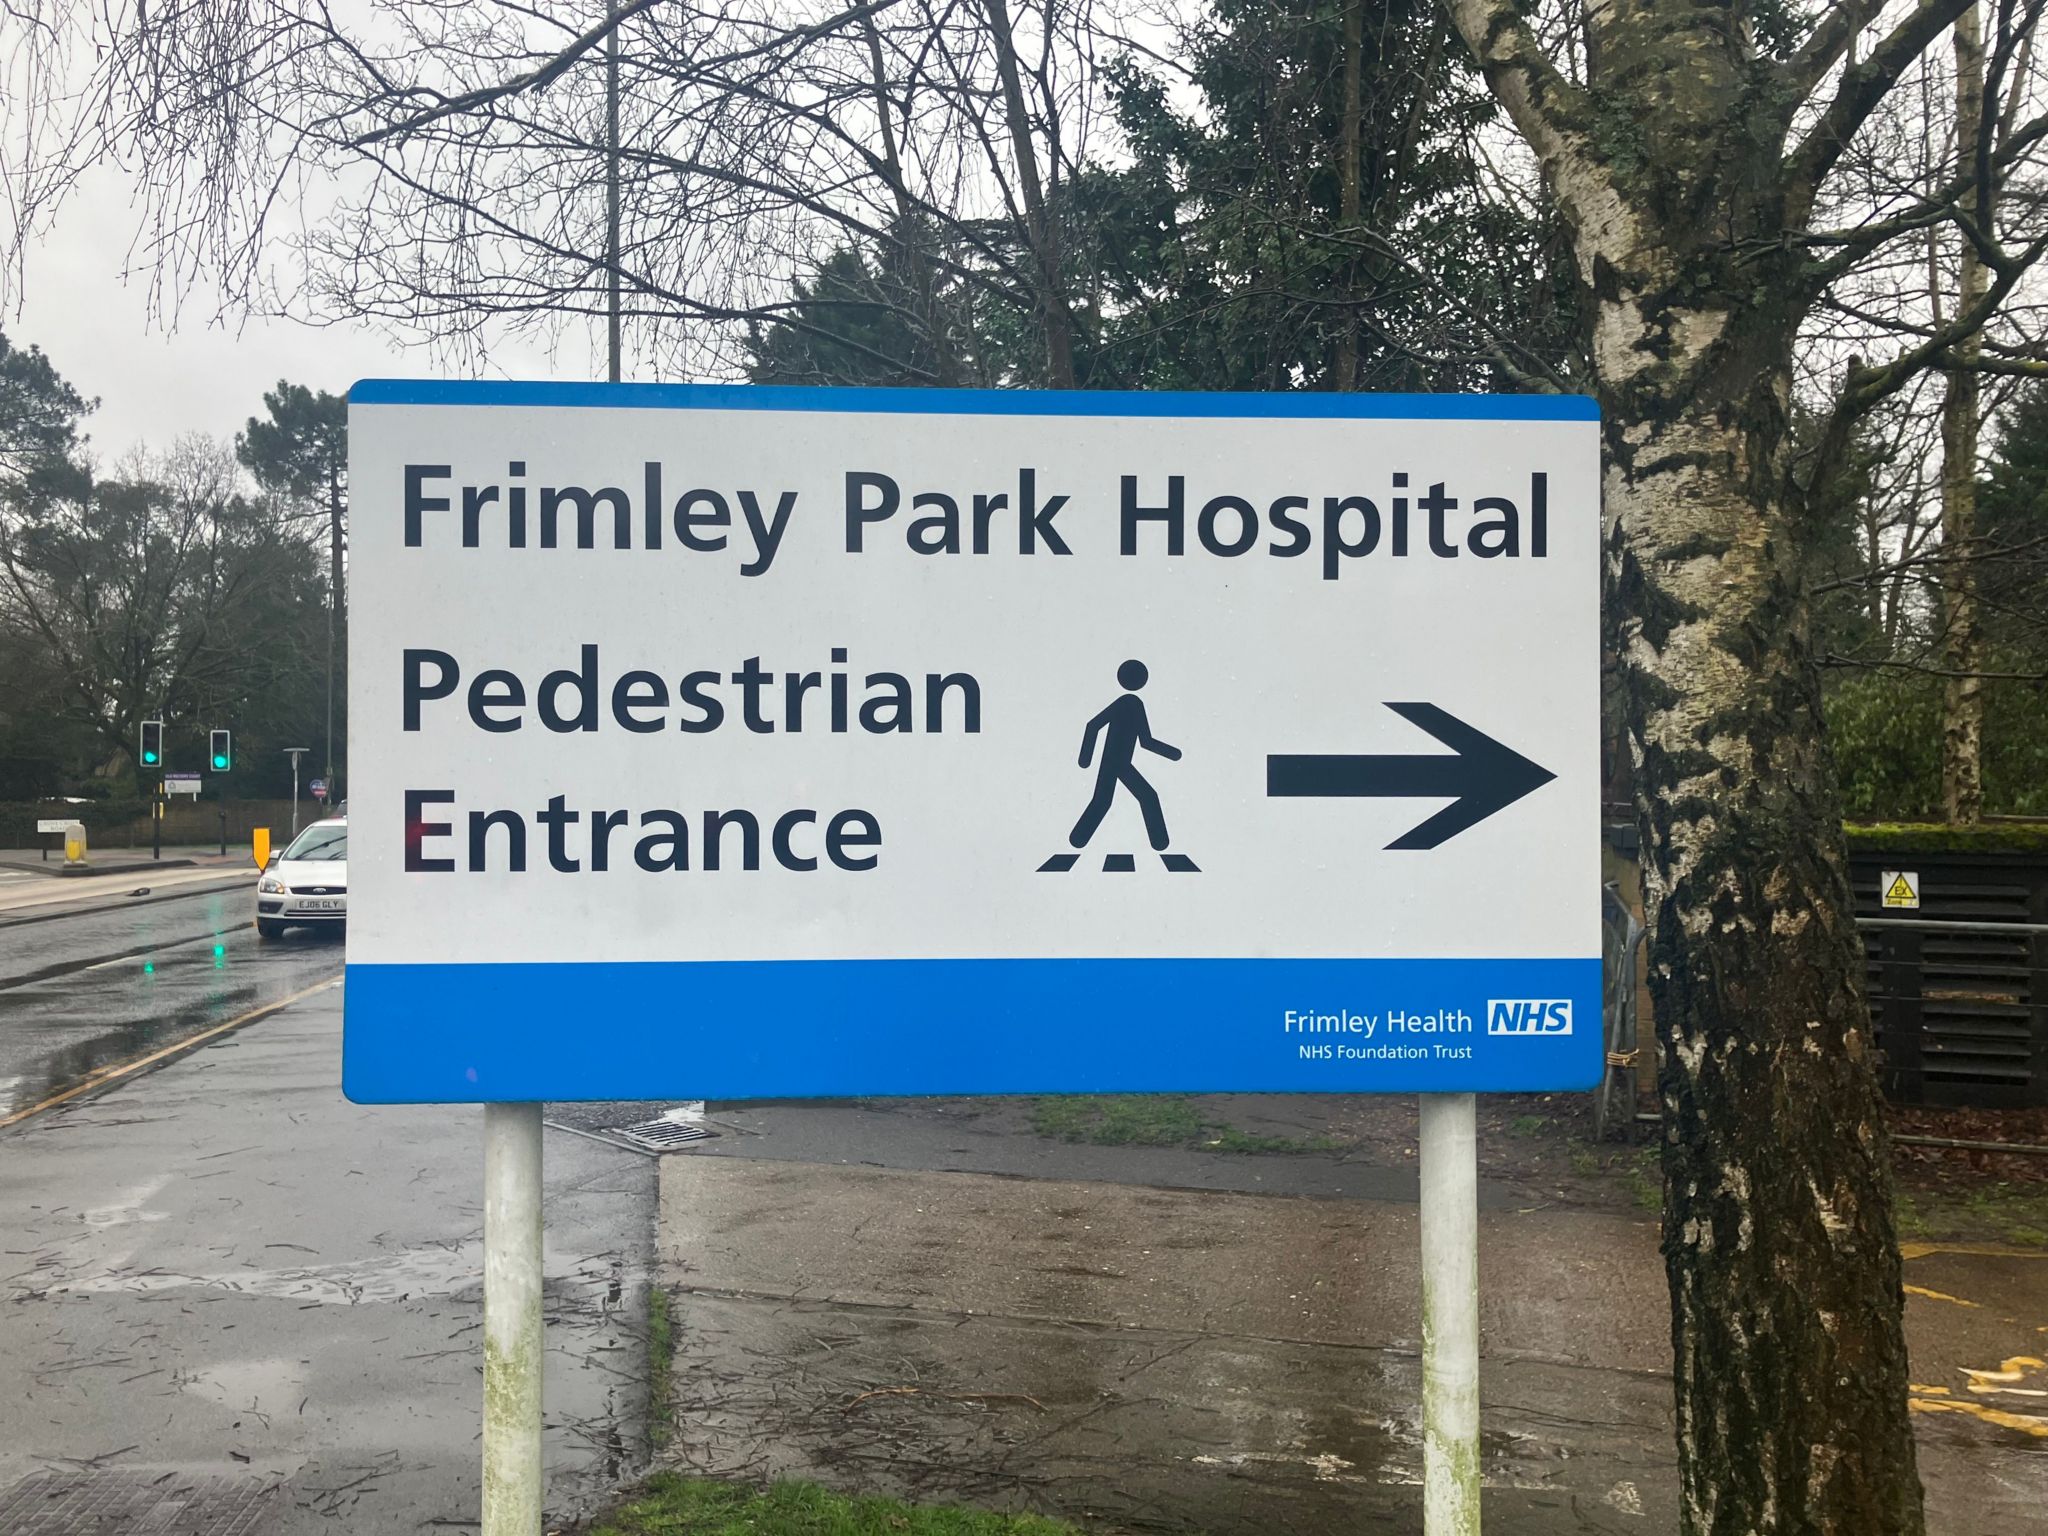 Sign showing patients entrance to Frimley Park Hospital